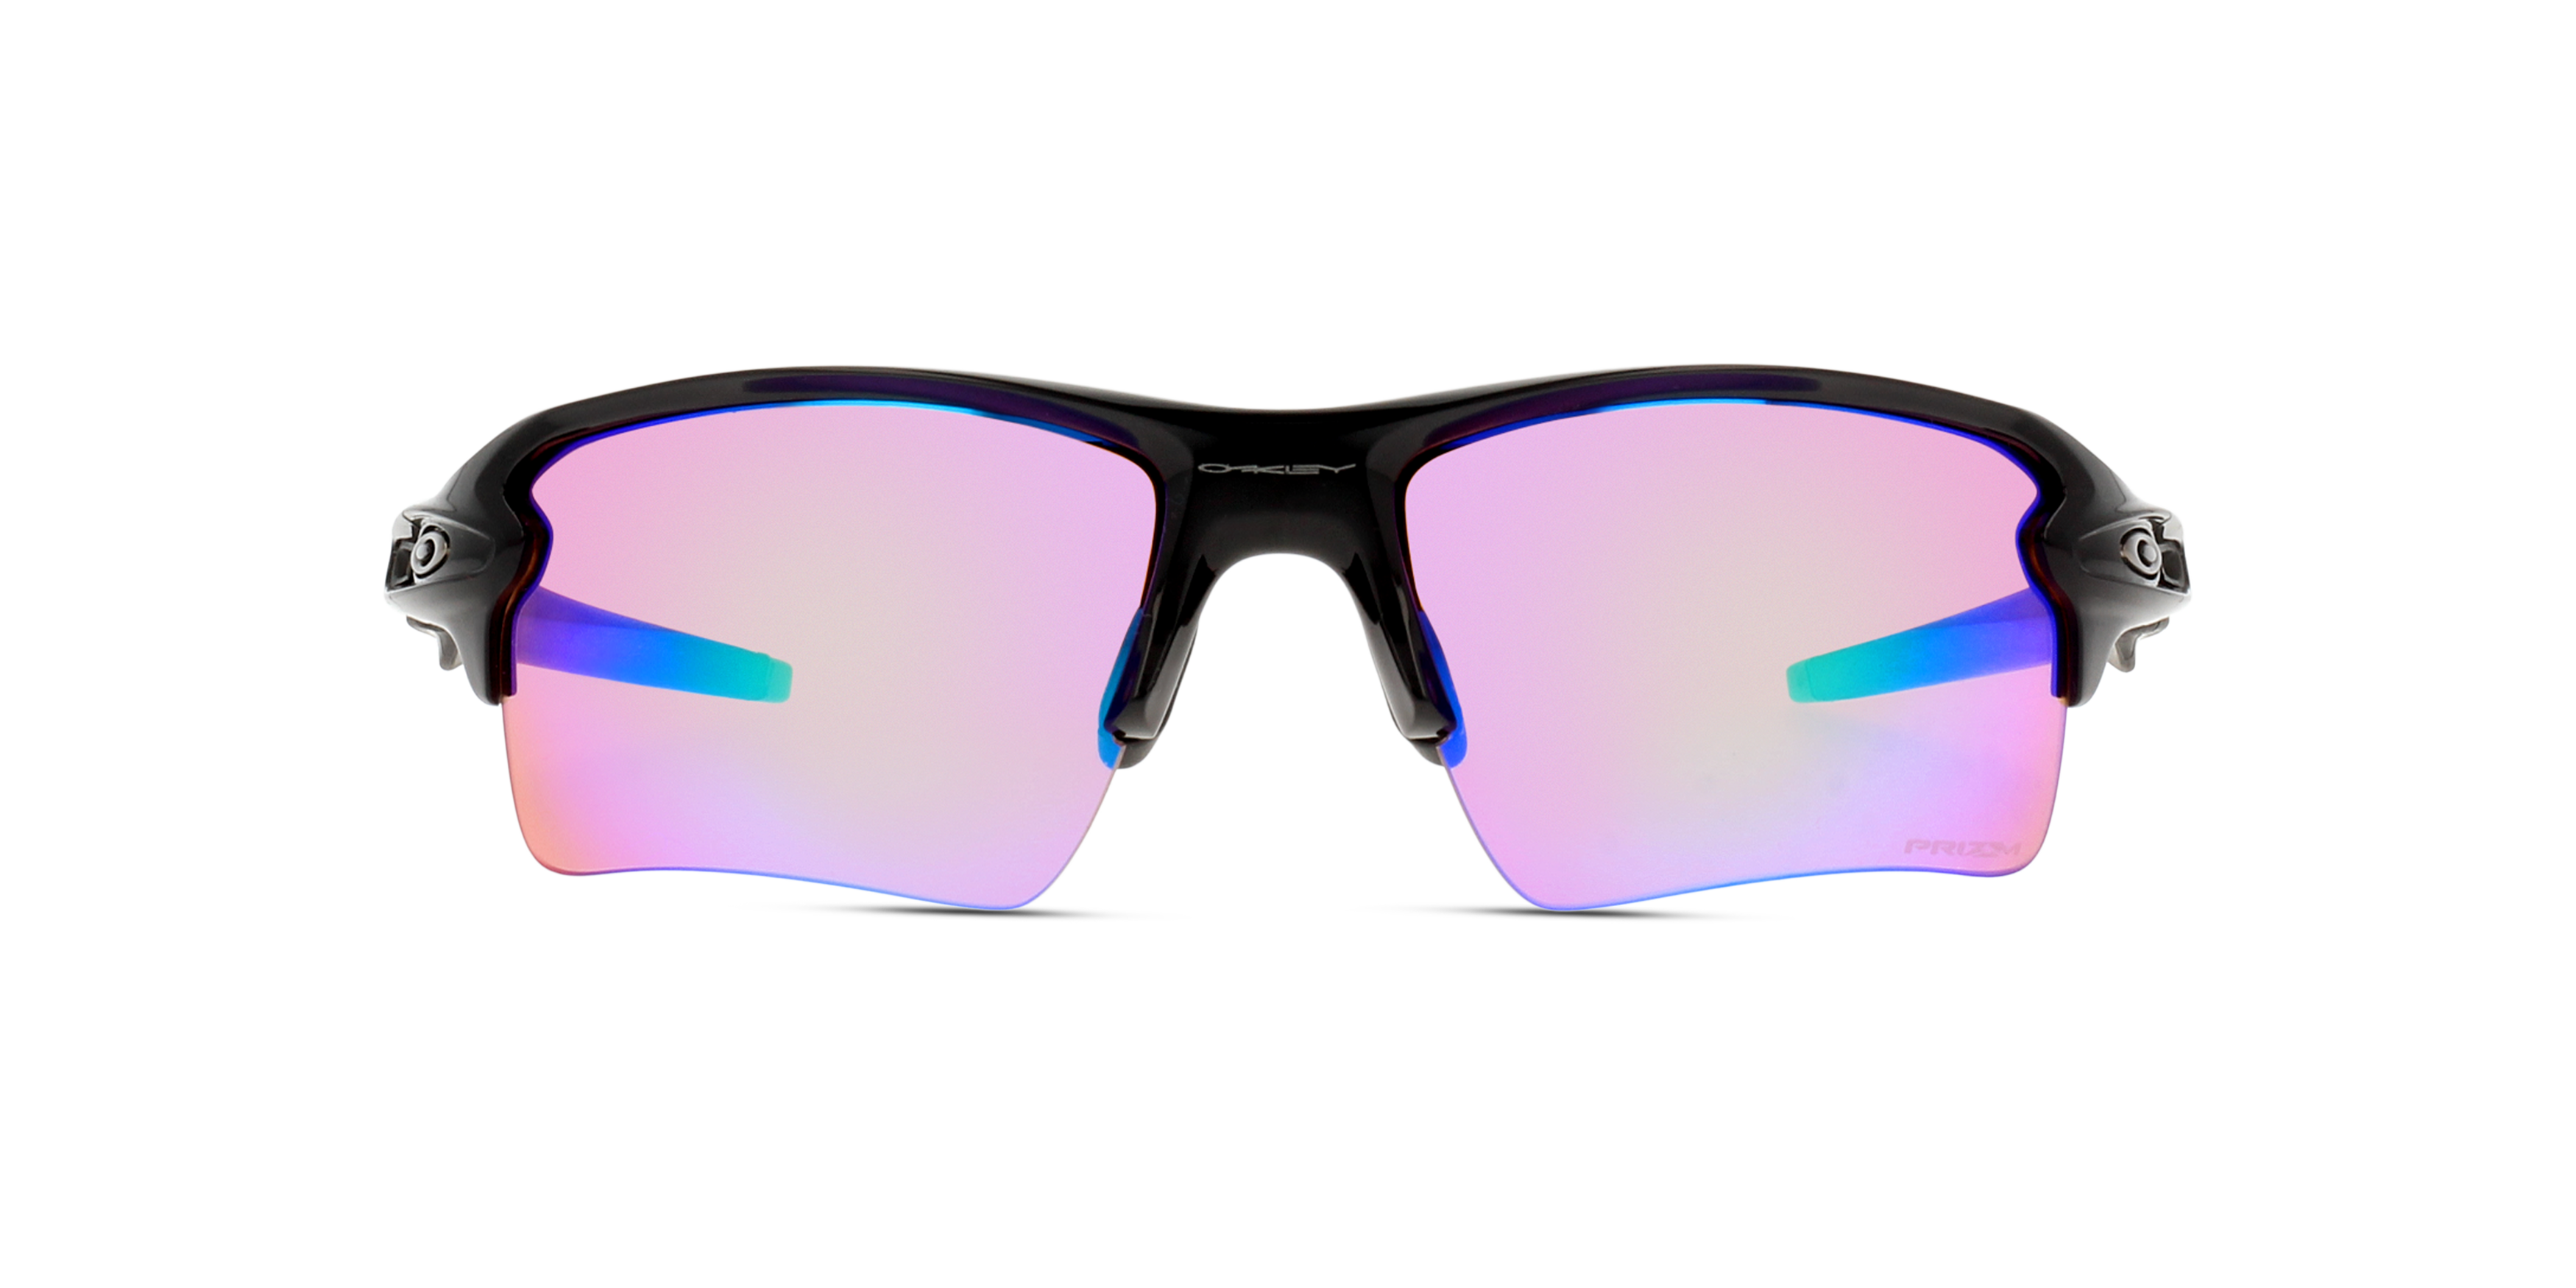 [products.image.front] OAKLEY FLAK 2.0 XL OO9188 918805